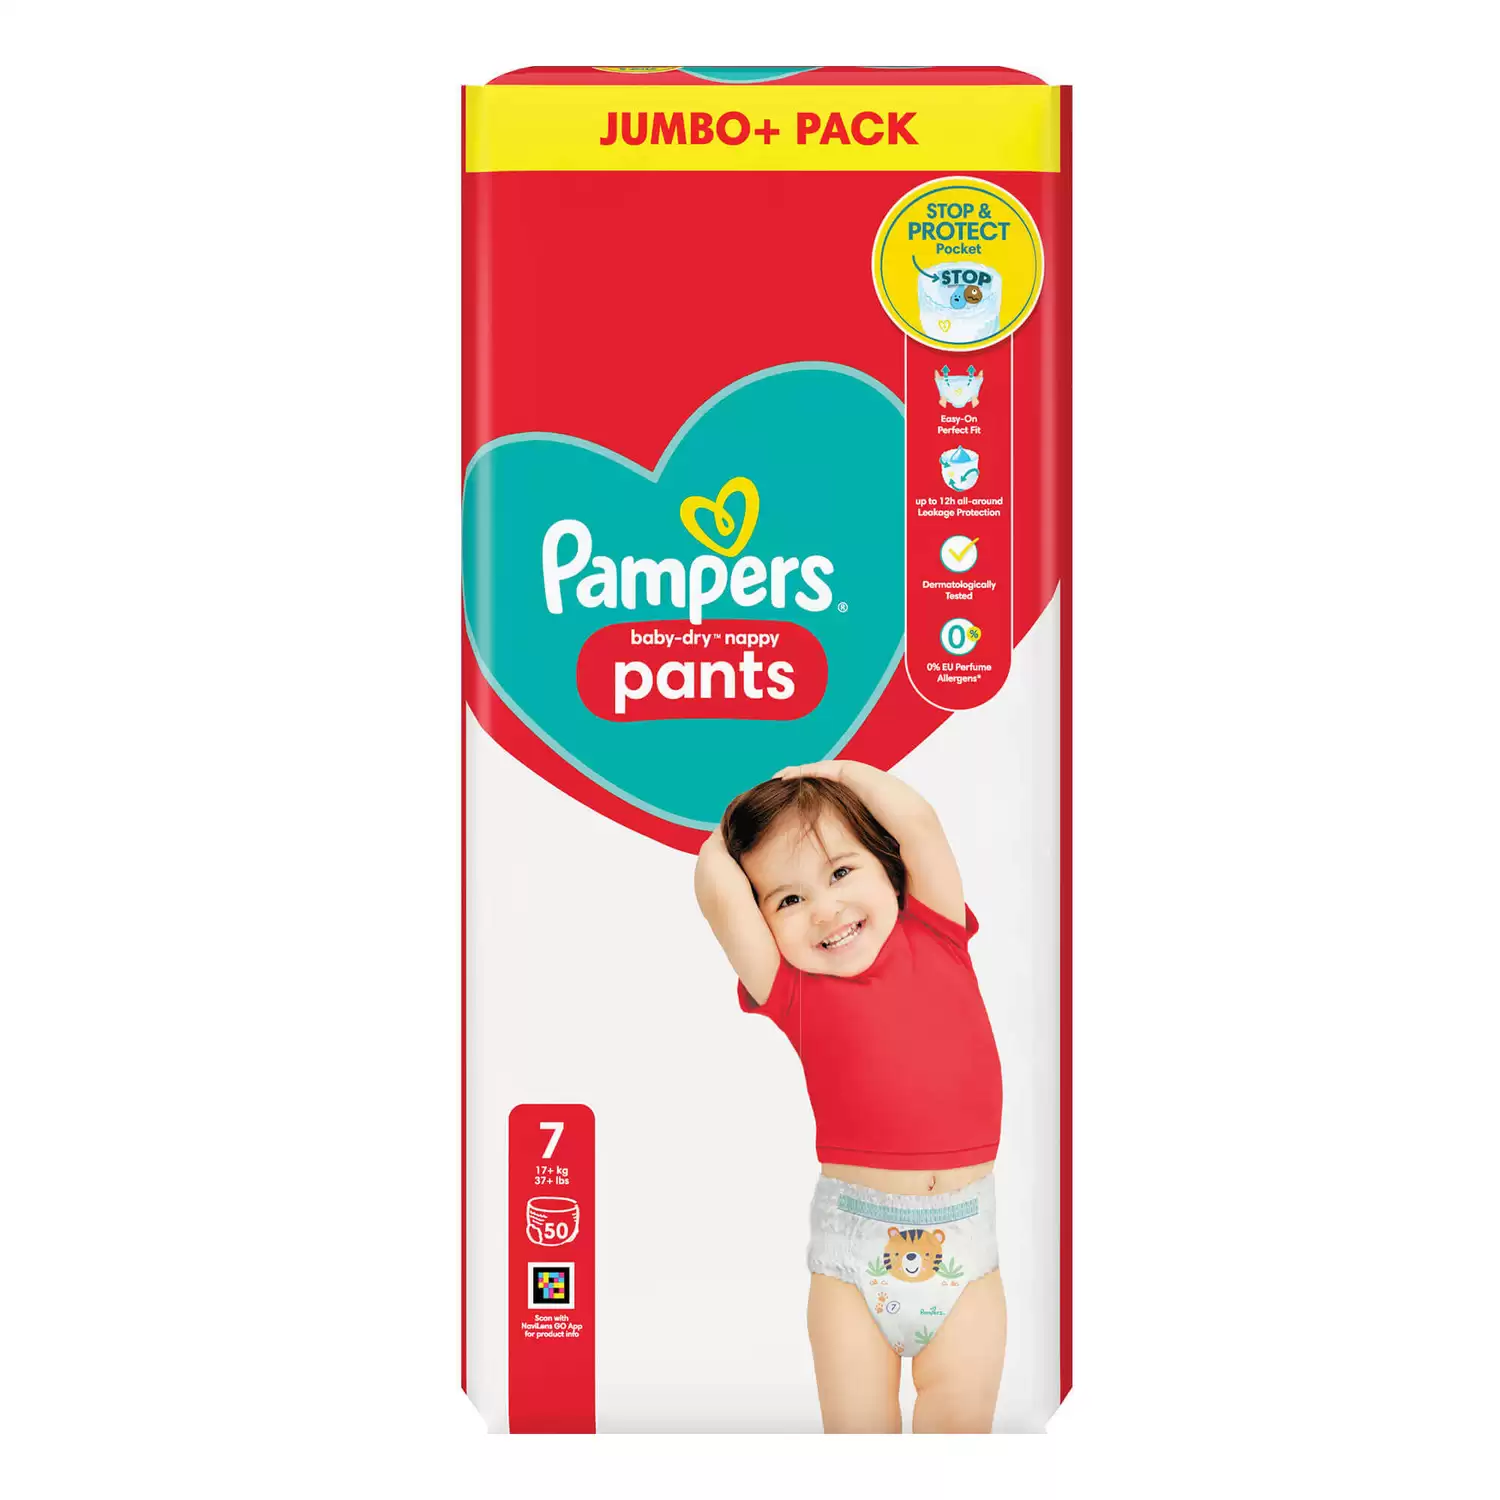 https://www.gompels.co.uk/image/cache/data/77247-pampers-baby-dry-nappy-pants-size-7-50-pack-1500x1500.webp